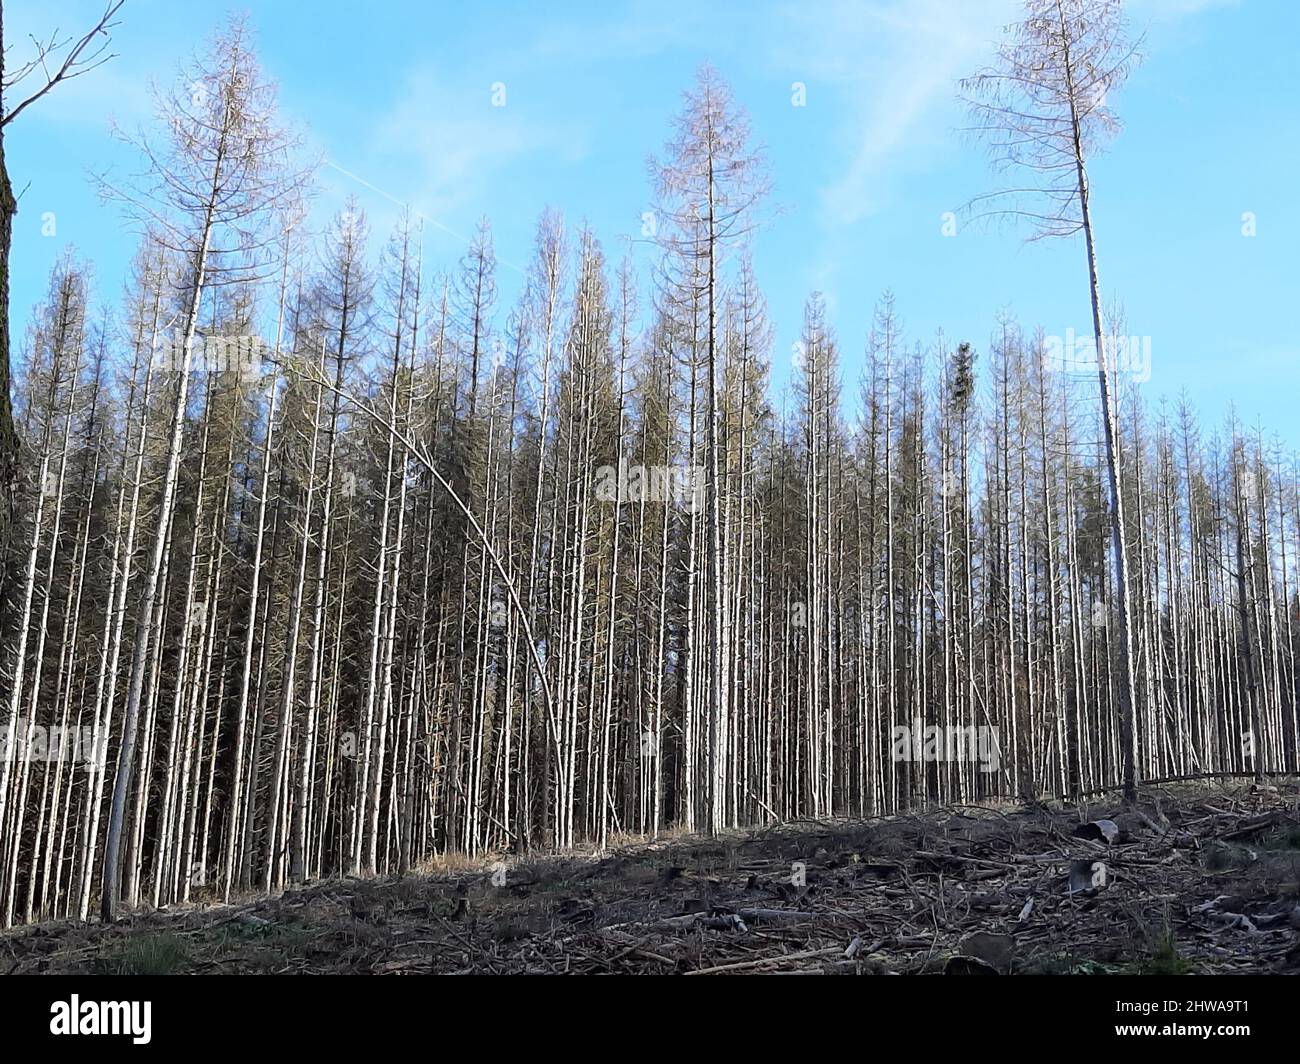 Norway Spruce Picea Abies Dead Spruces After Bark Beetle Infestation Germany Stock Photo Alamy